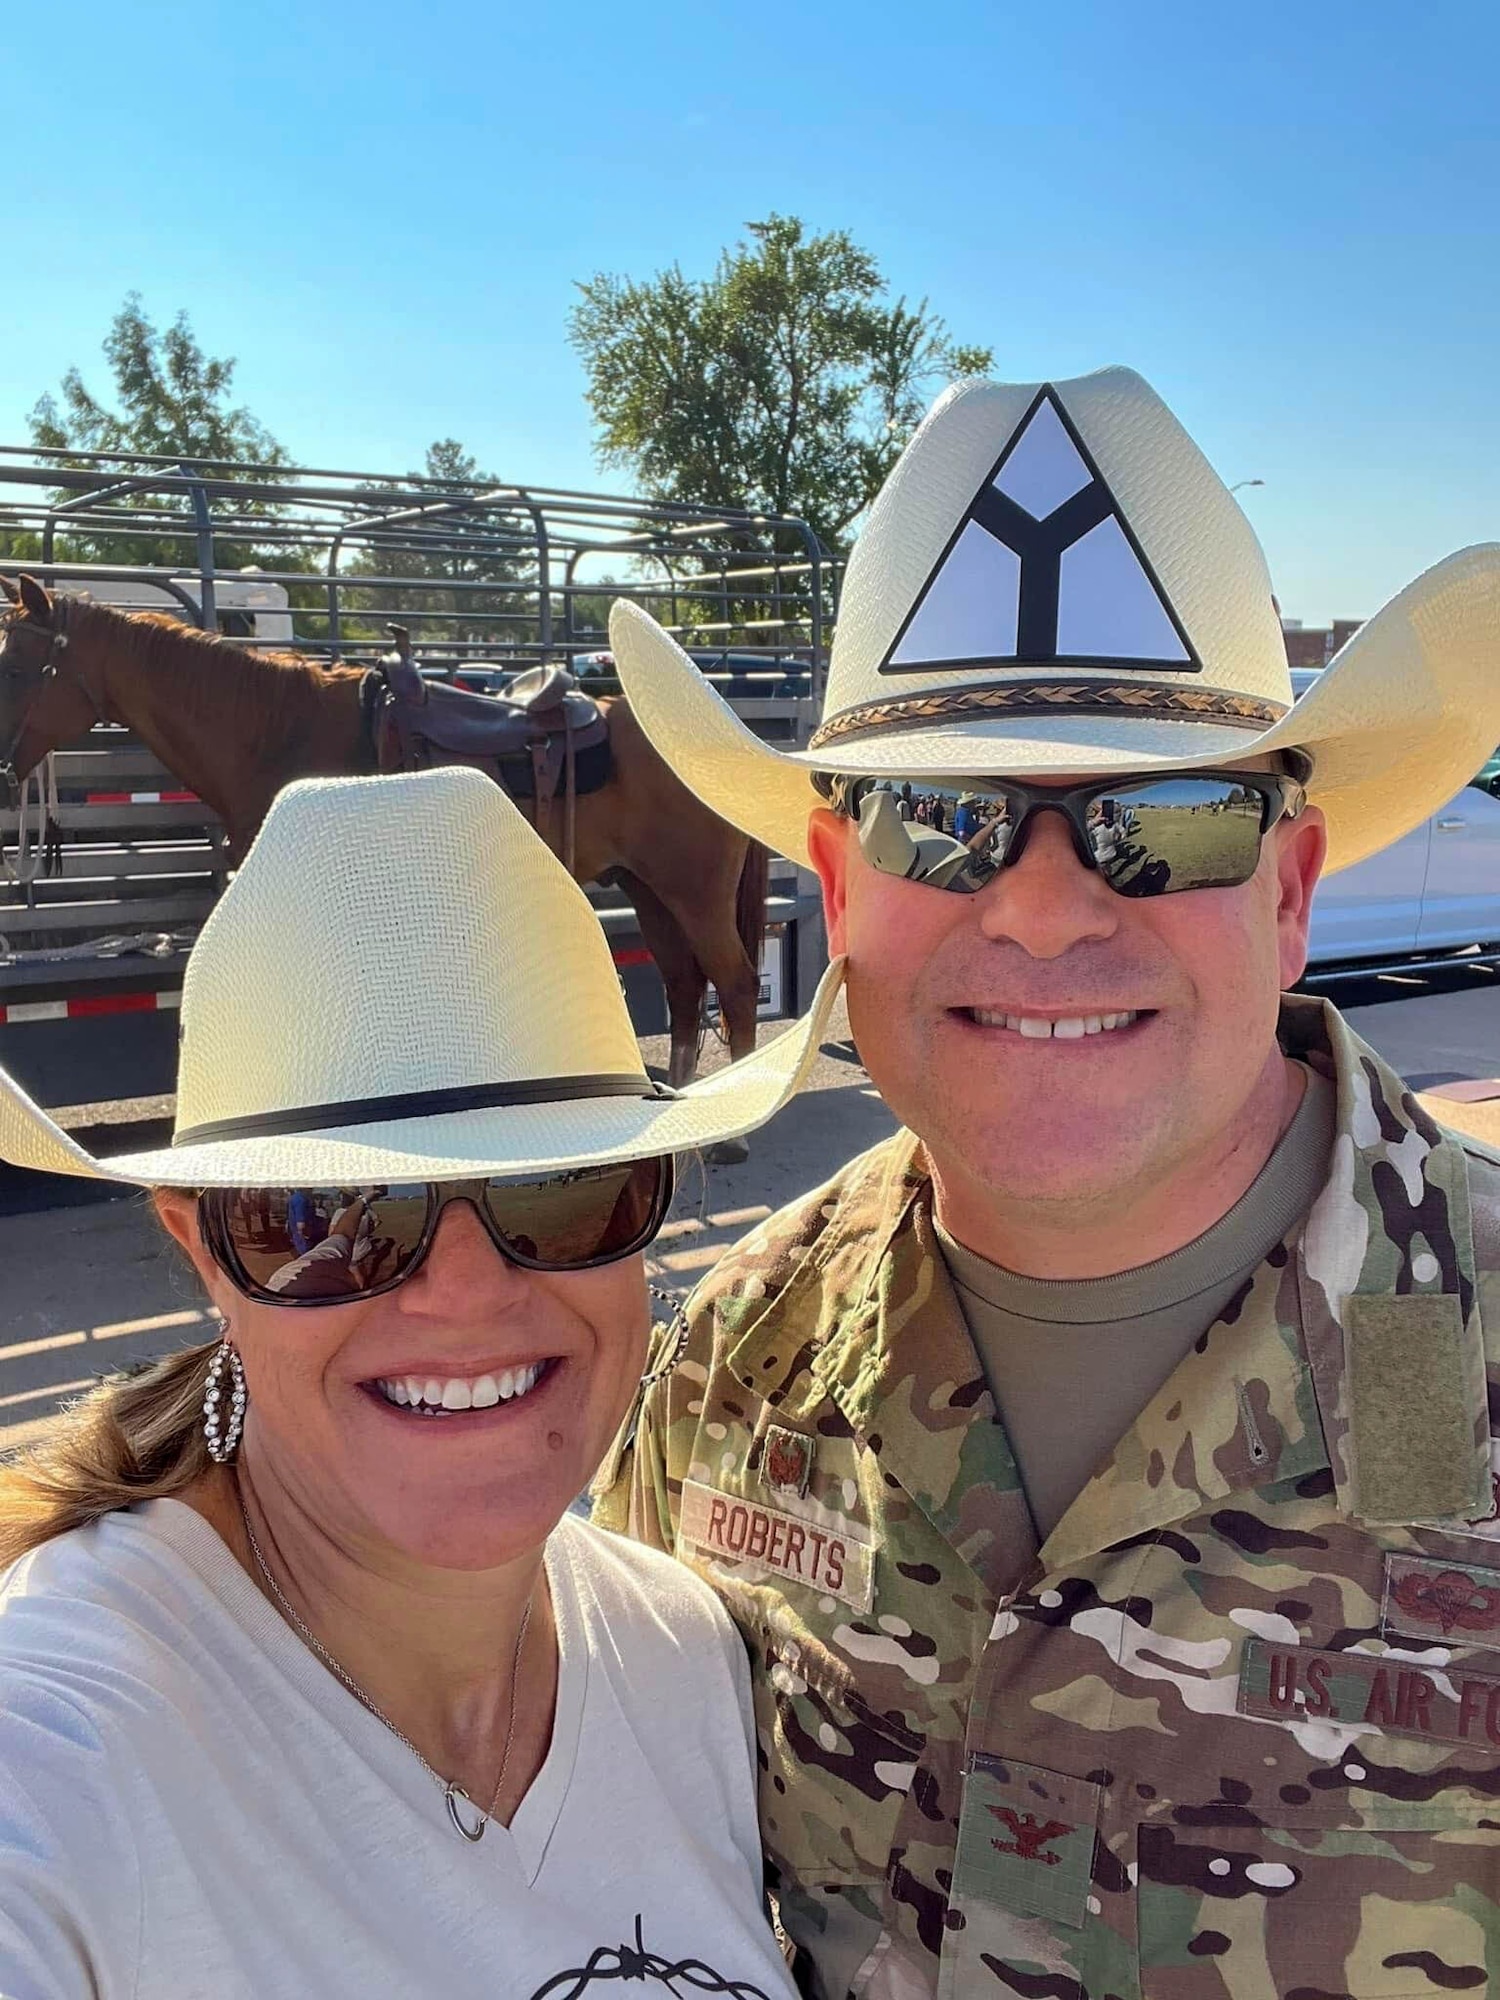 U.S. Air Force Col. Daniel Roberts, 97th Medical Group commander, poses for a photo with his wife, Christi, during the annual cattle drive at Altus Air Force Base, Oklahoma, Aug. 25, 2022. Daniel and Christi have two sons, Alex and Austin, who love to travel wherever they are stationed. (courtesy photo)